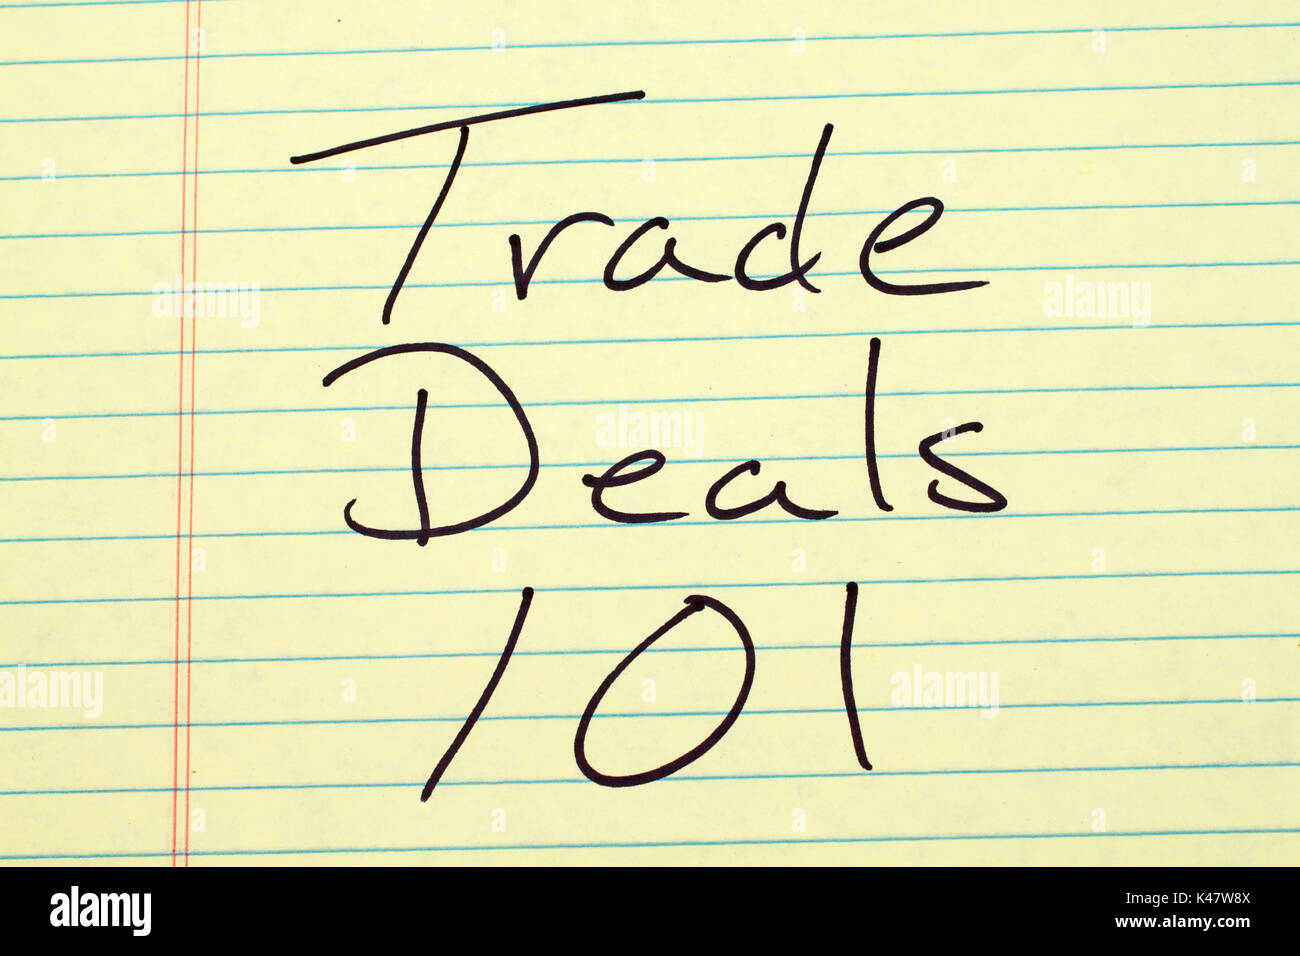 The words 'Trade Deals 101' on a yellow legal pad Stock Photo